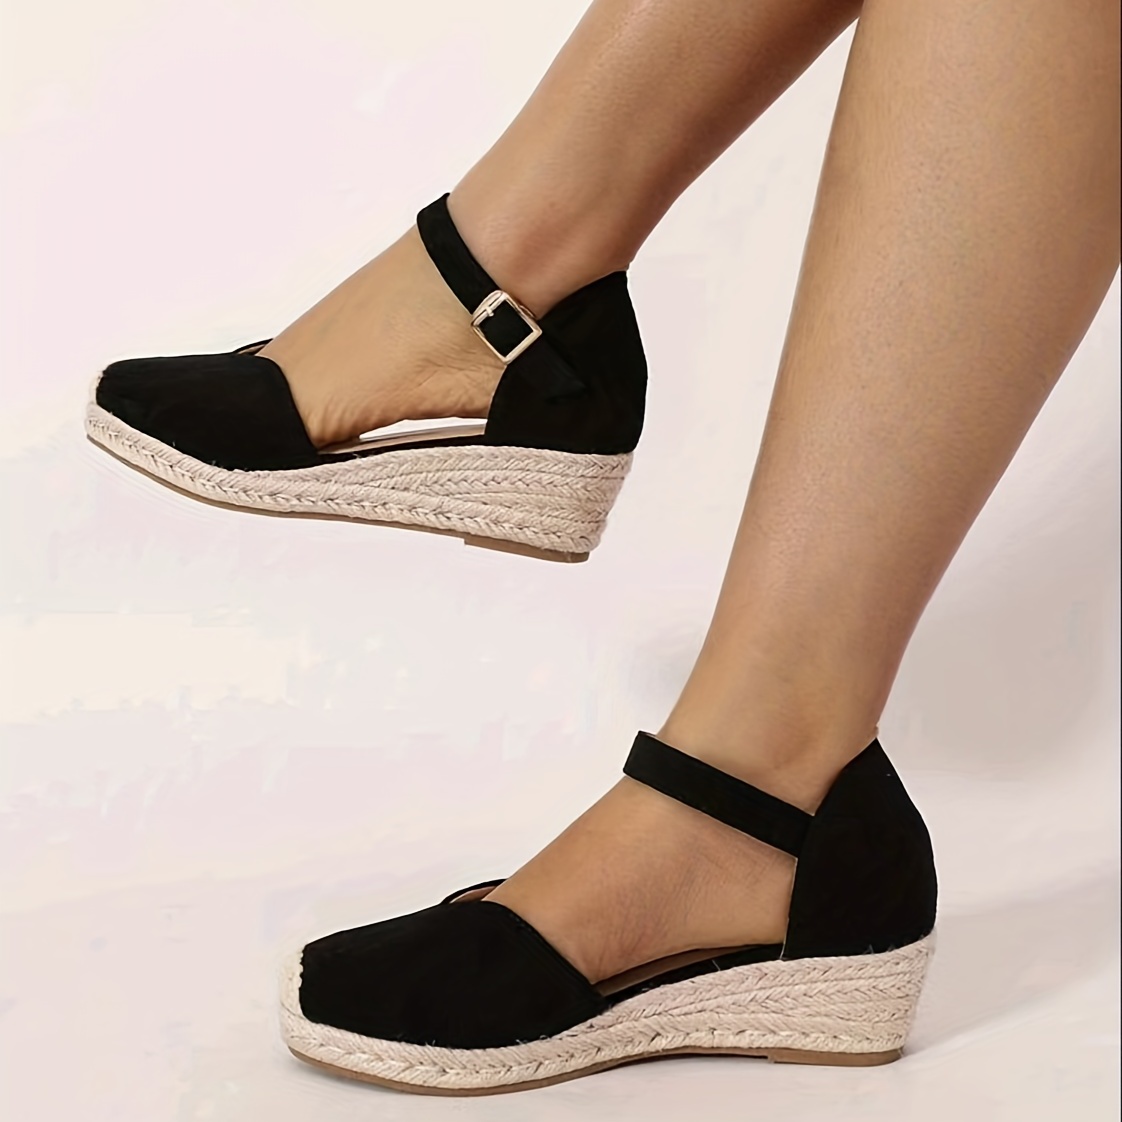 espadrille wedge sandals women s closed toe ankle strap d